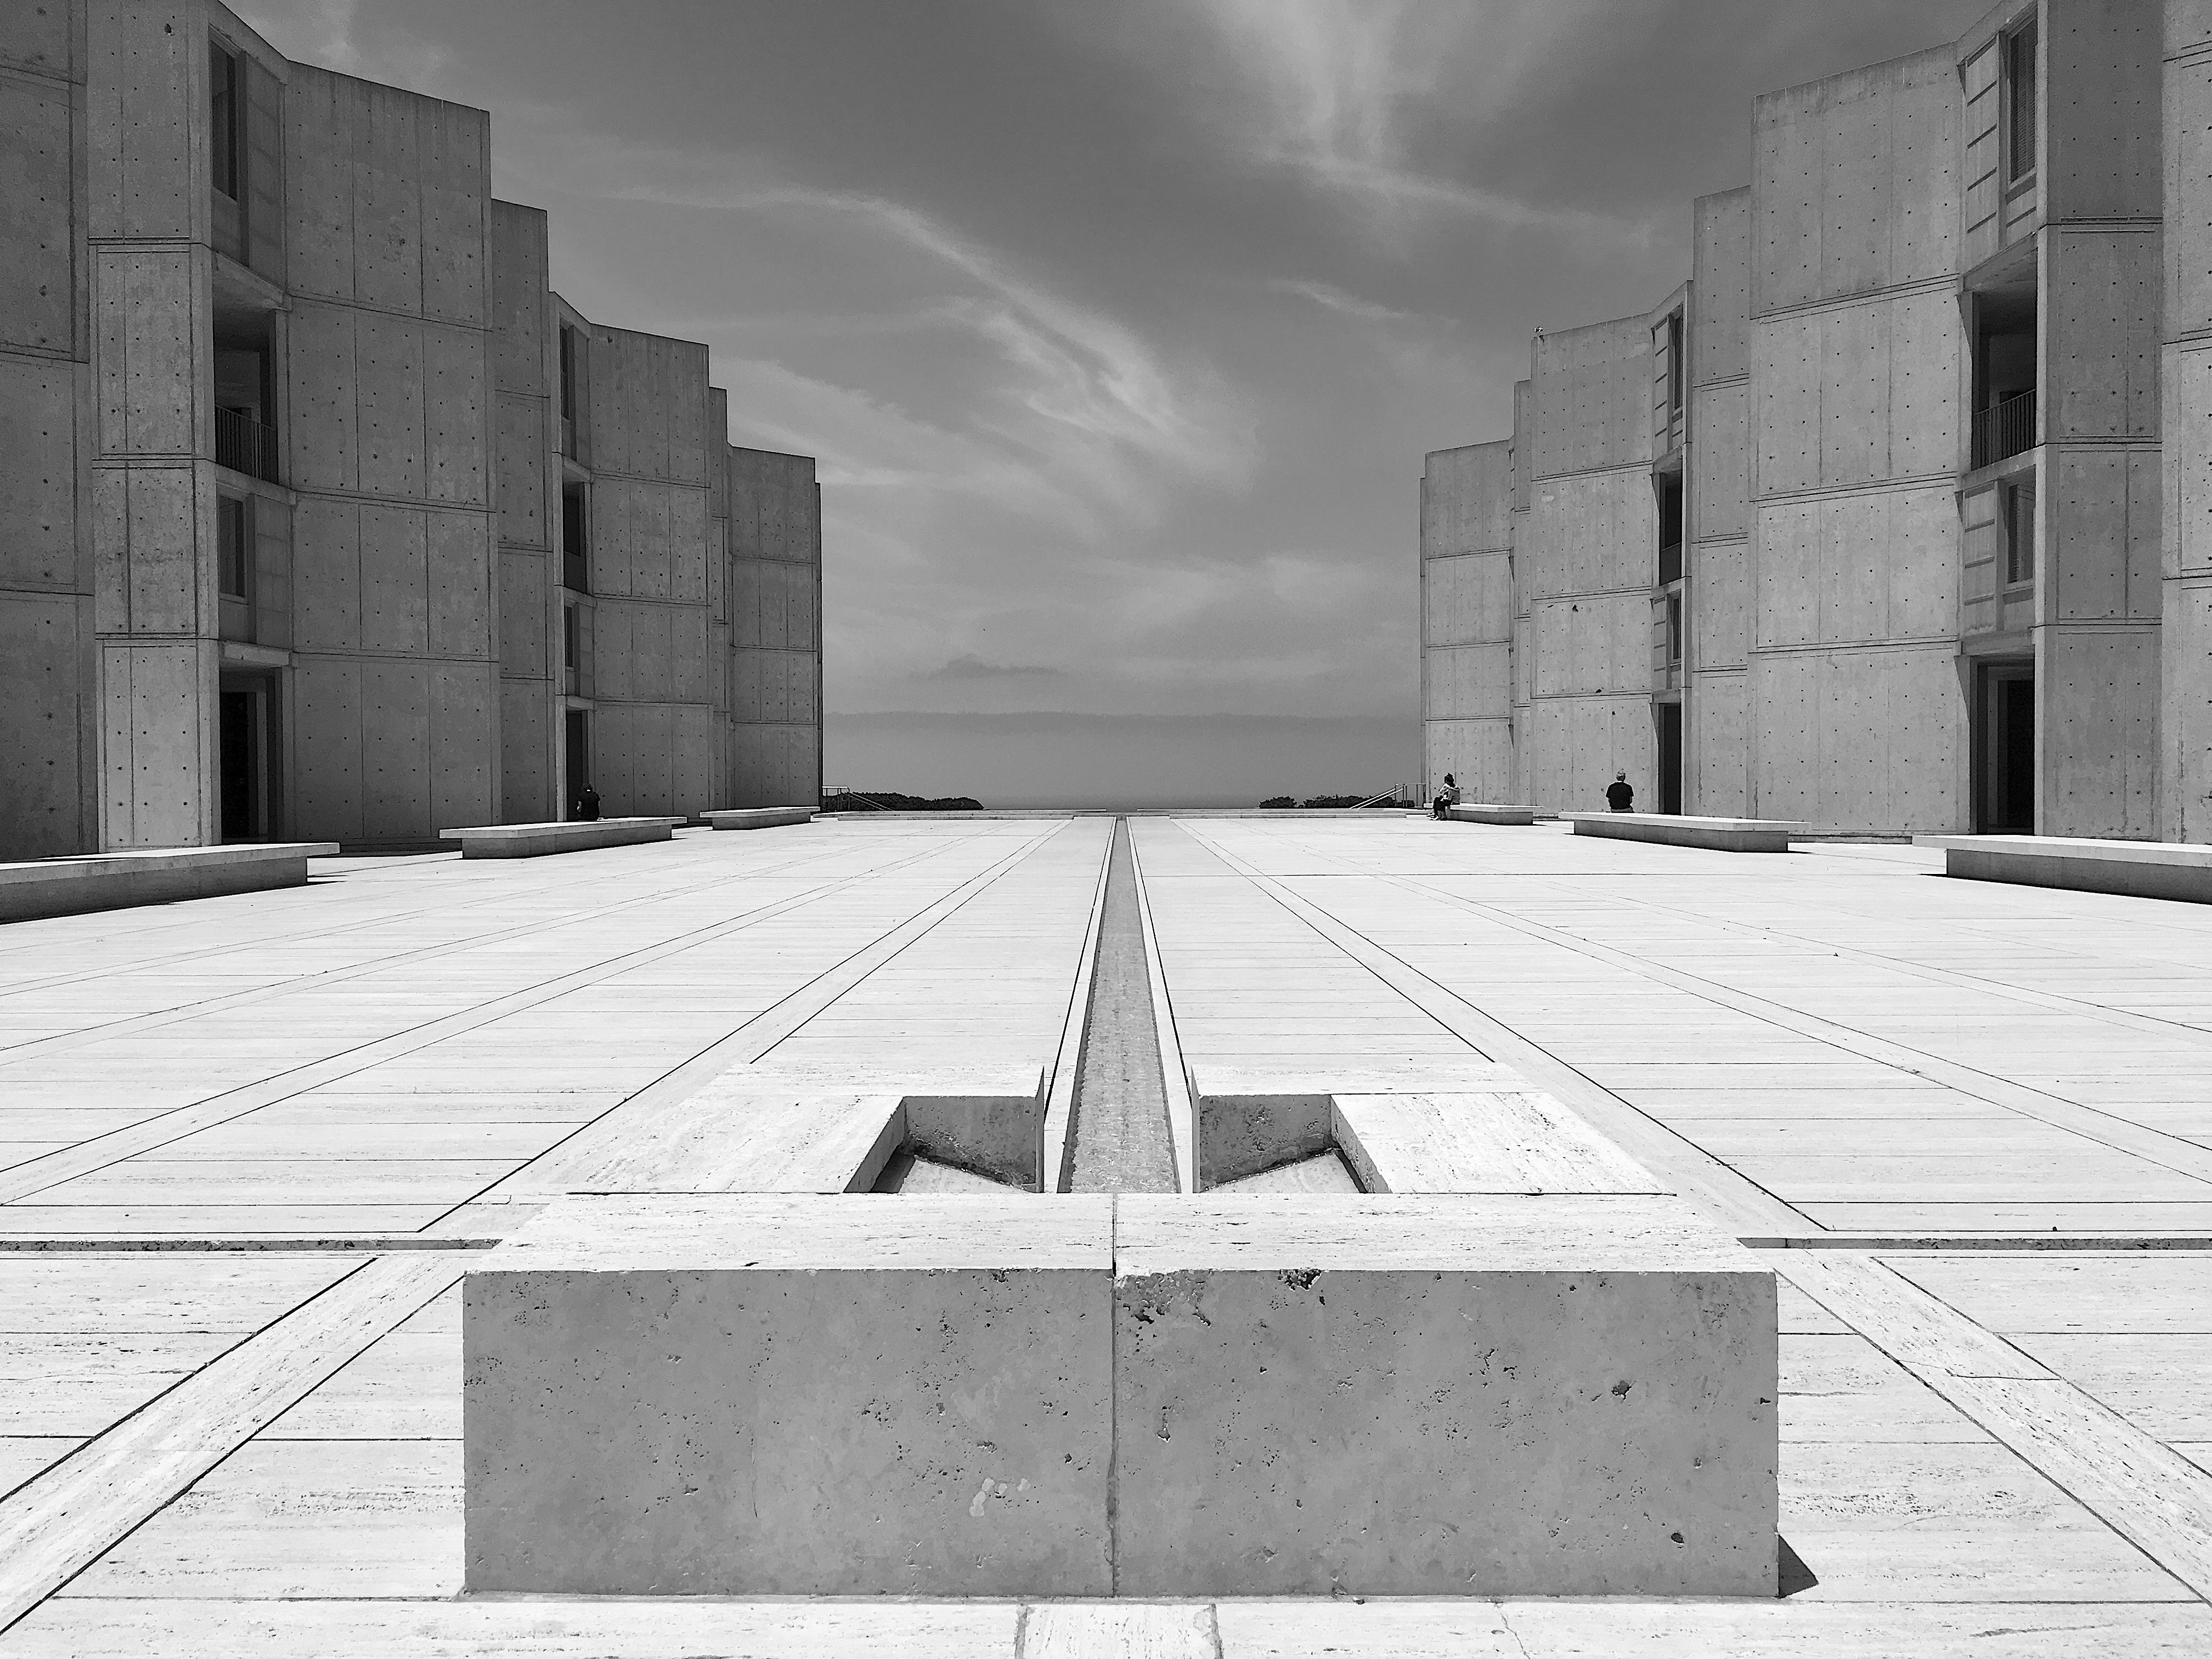 Salk Institute Photograph of the courtyard of the Salk Institute for Biological Studies in La Jolla, San Diego. The Pacific Ocean is visible in the background, with concrete structures on the left and right of the photo.